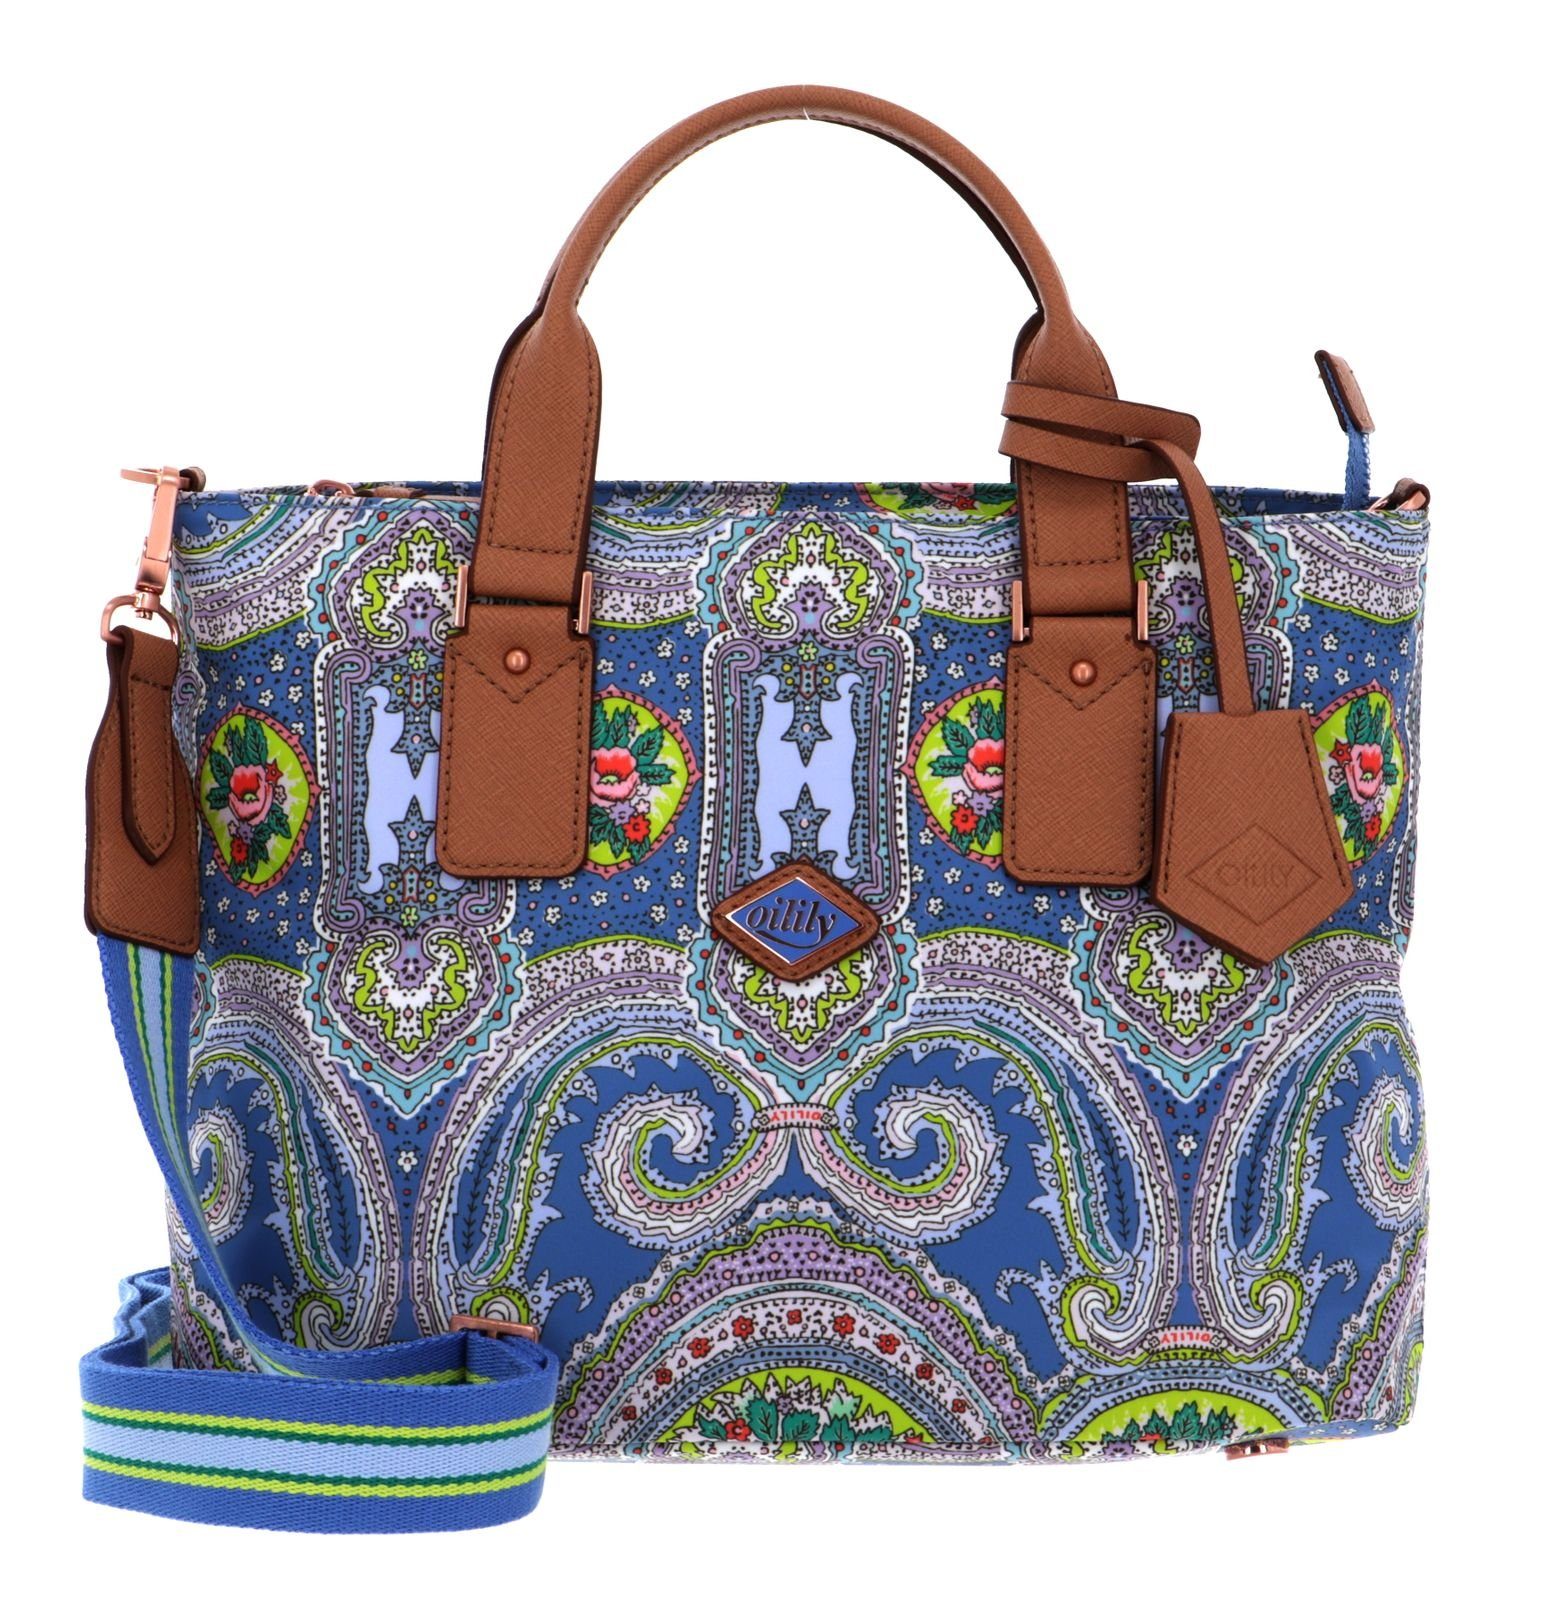 Oilily Handtasche City Rose Paisley